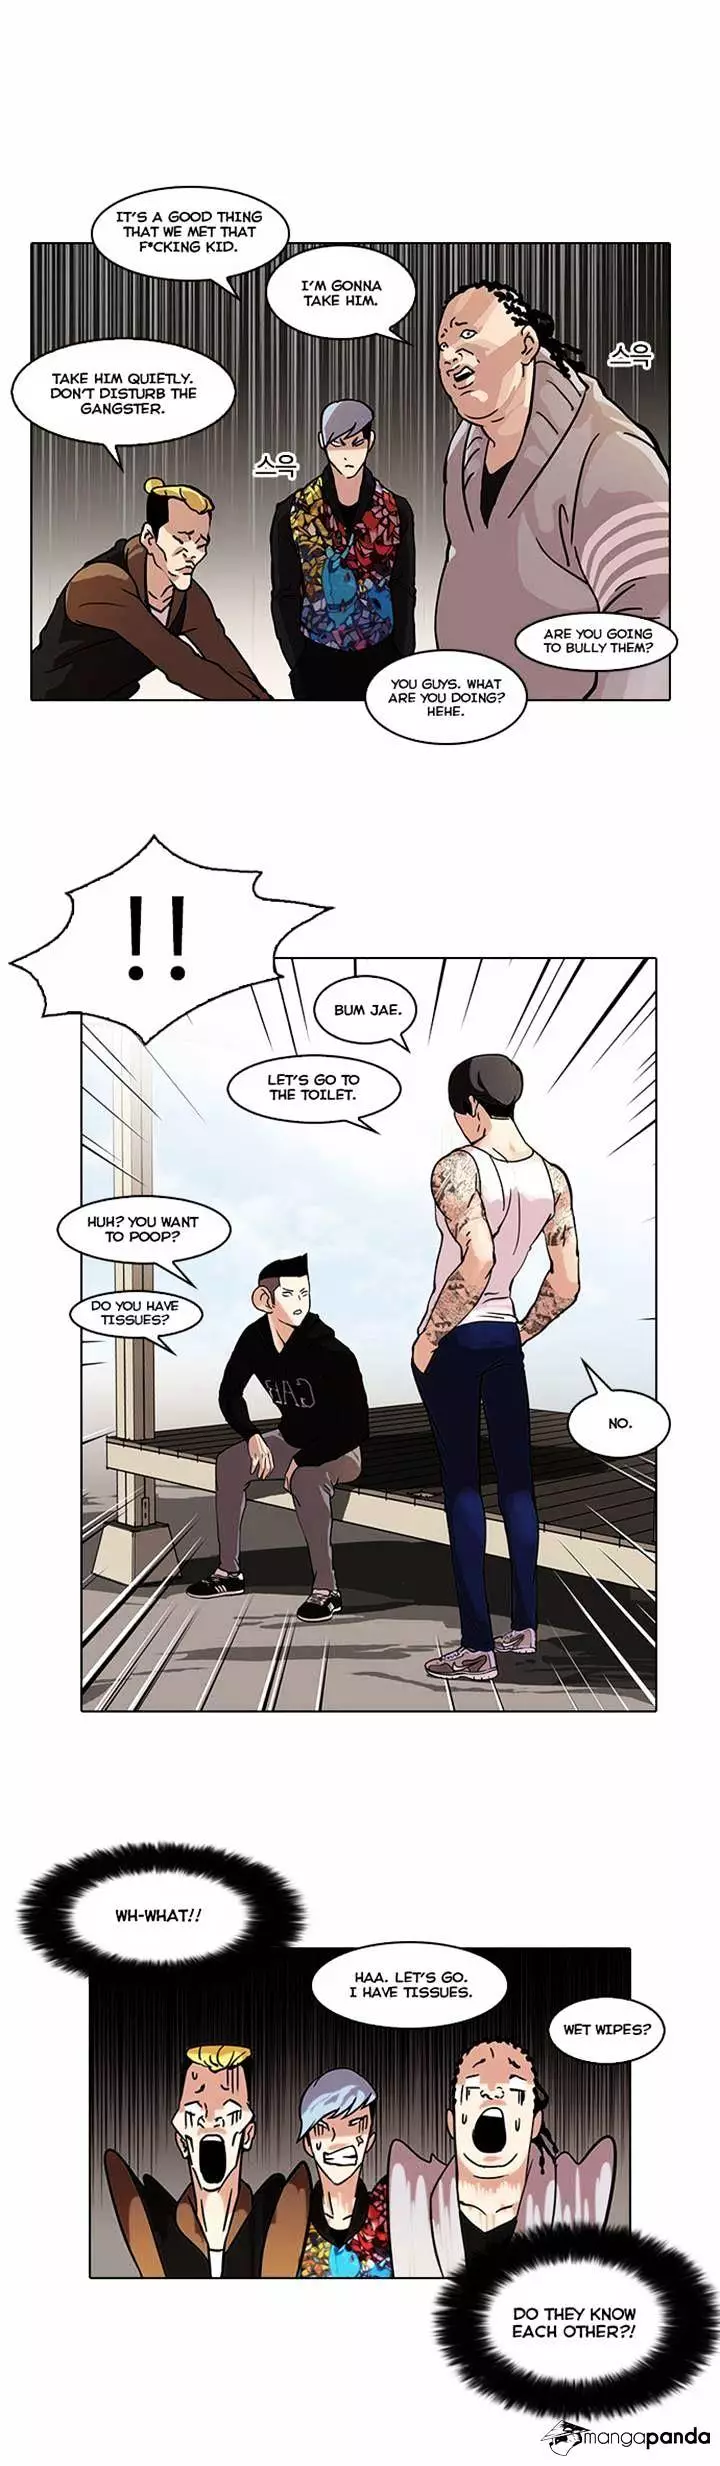 Lookism - 57.1 page 5-54c4c639